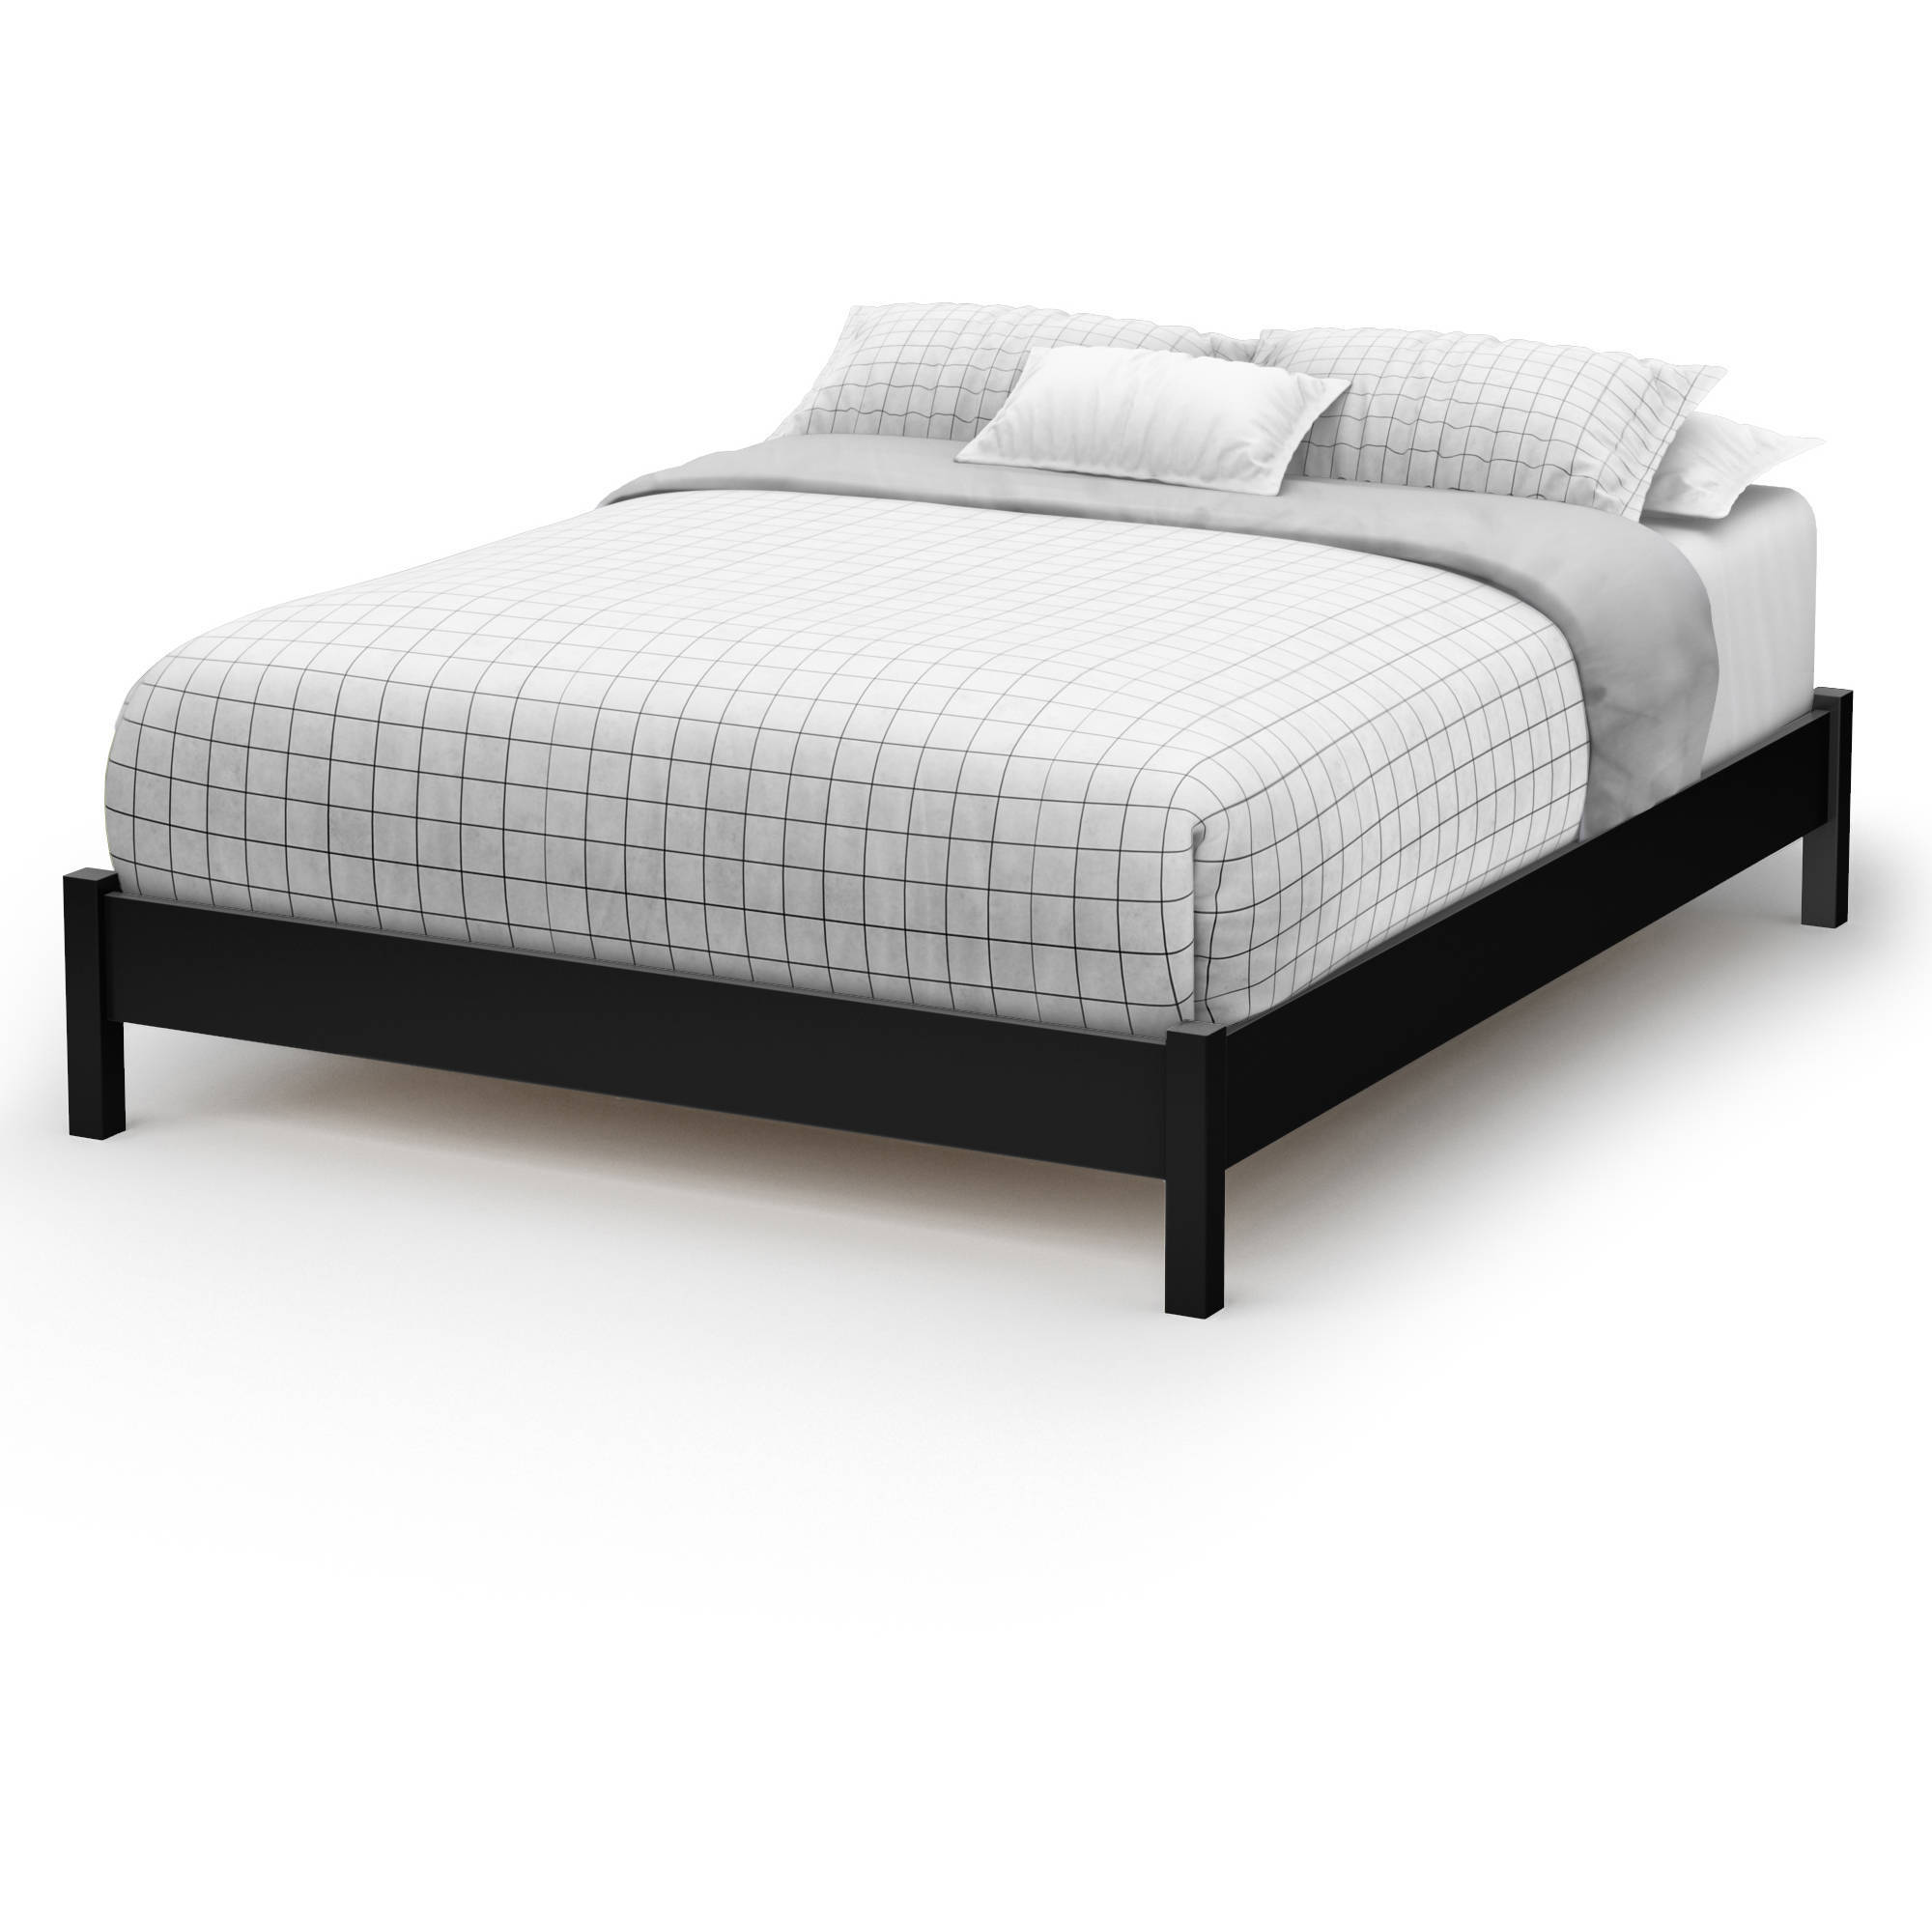 South Shore SoHo Queen Platform Bed, Multiple Finishes - image 1 of 5